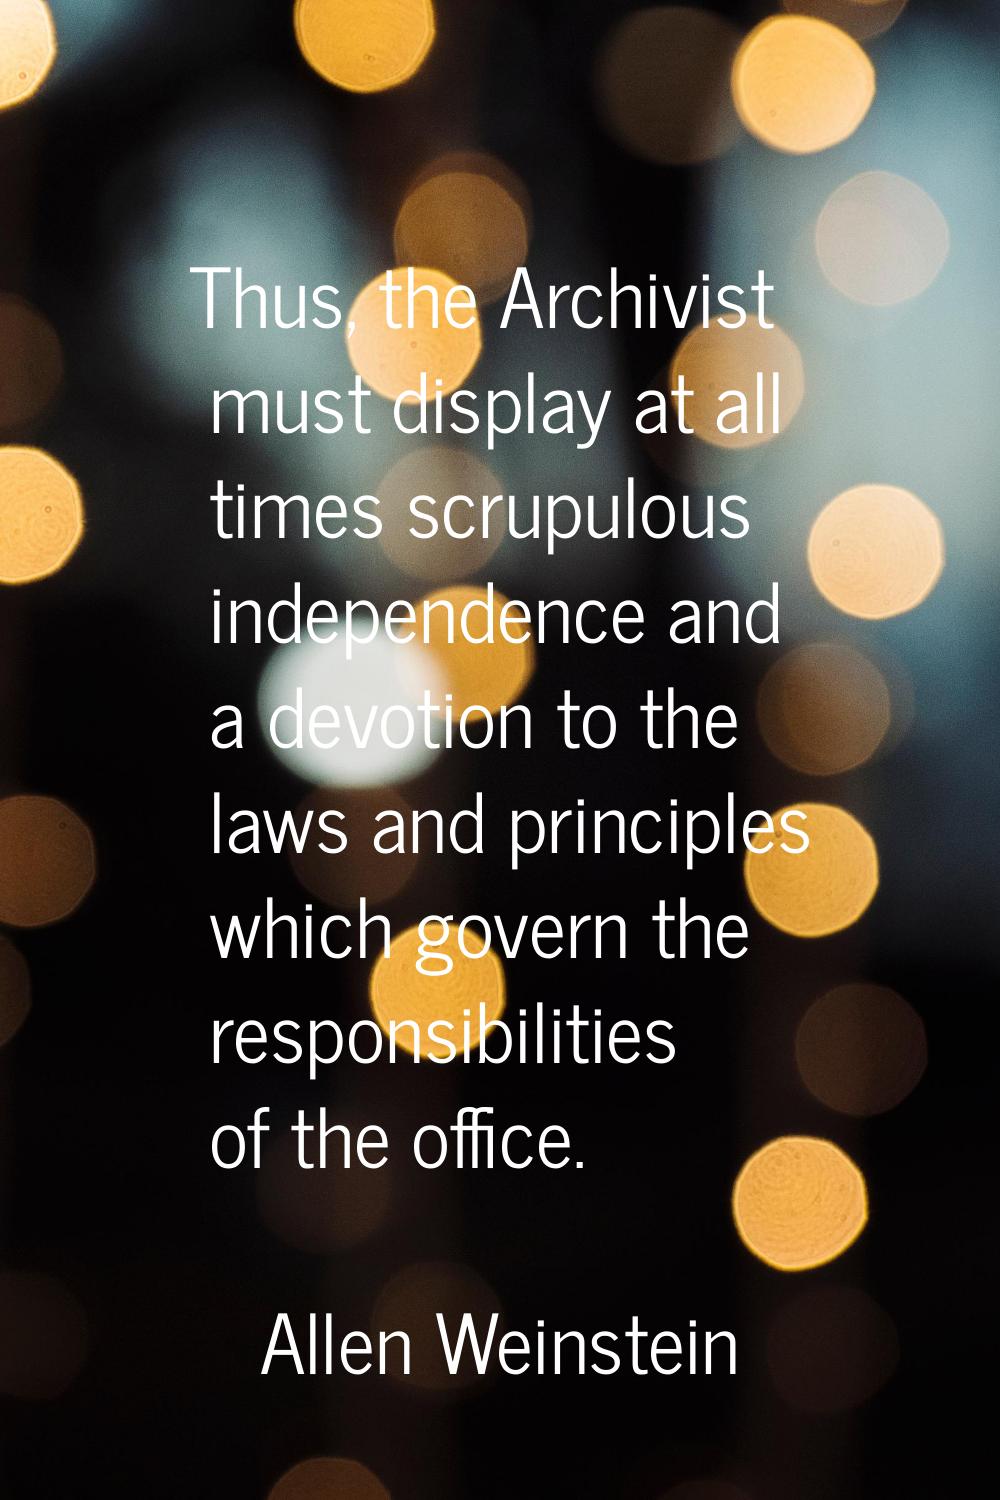 Thus, the Archivist must display at all times scrupulous independence and a devotion to the laws an